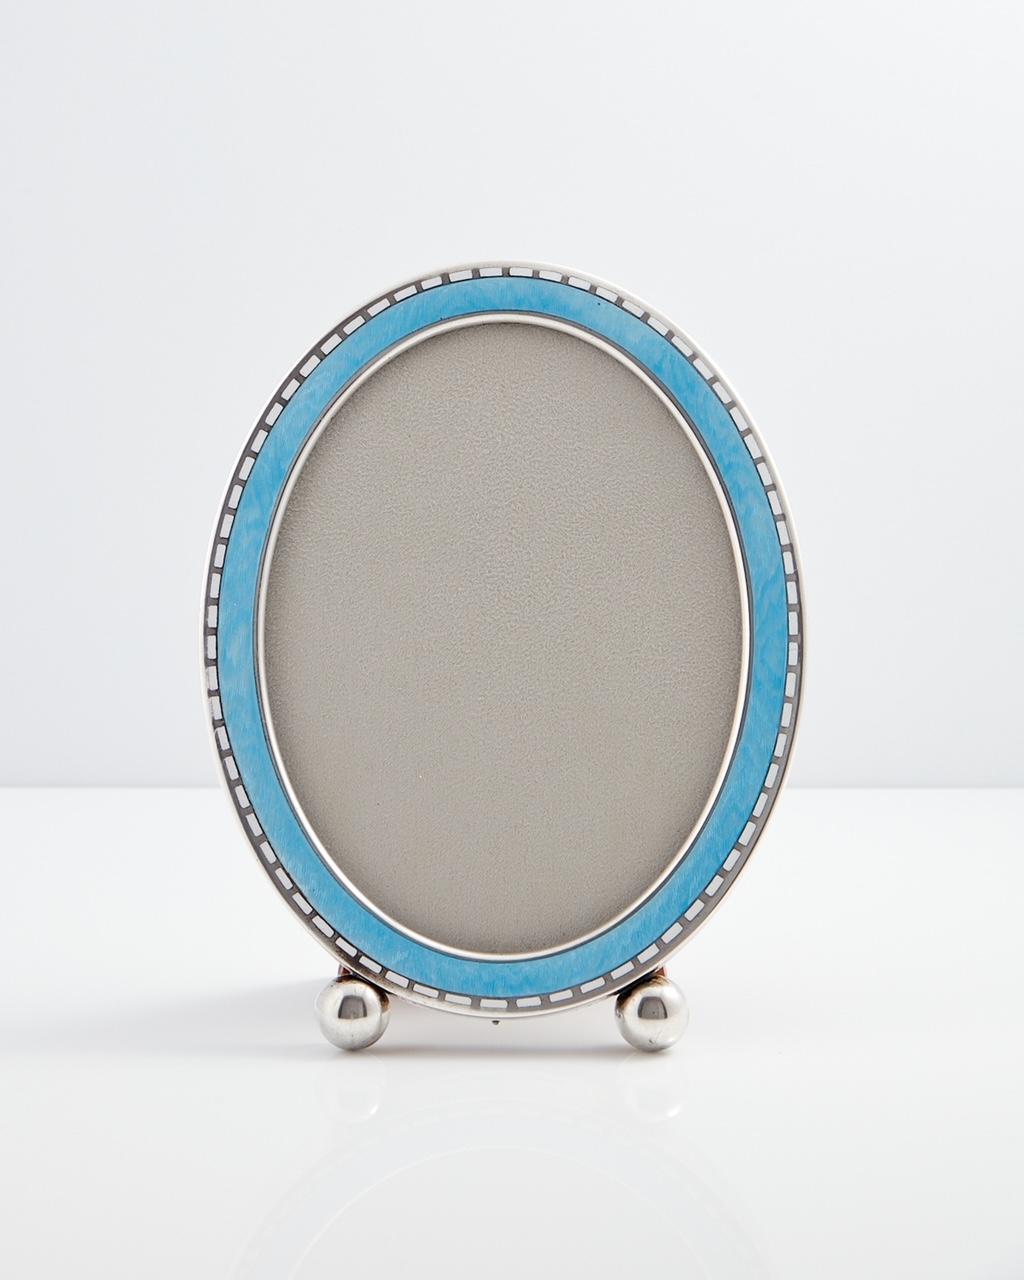 ﻿﻿Antique Art Deco Sterling Silver & Guilloche Enamel Photo Frame, Date Circa 1920, Origin USA.

A wonderful antique Art Deco Sterling Silver Enamel picture frame. The turquoise and white enamel border set the piece apart.

Both the silver and